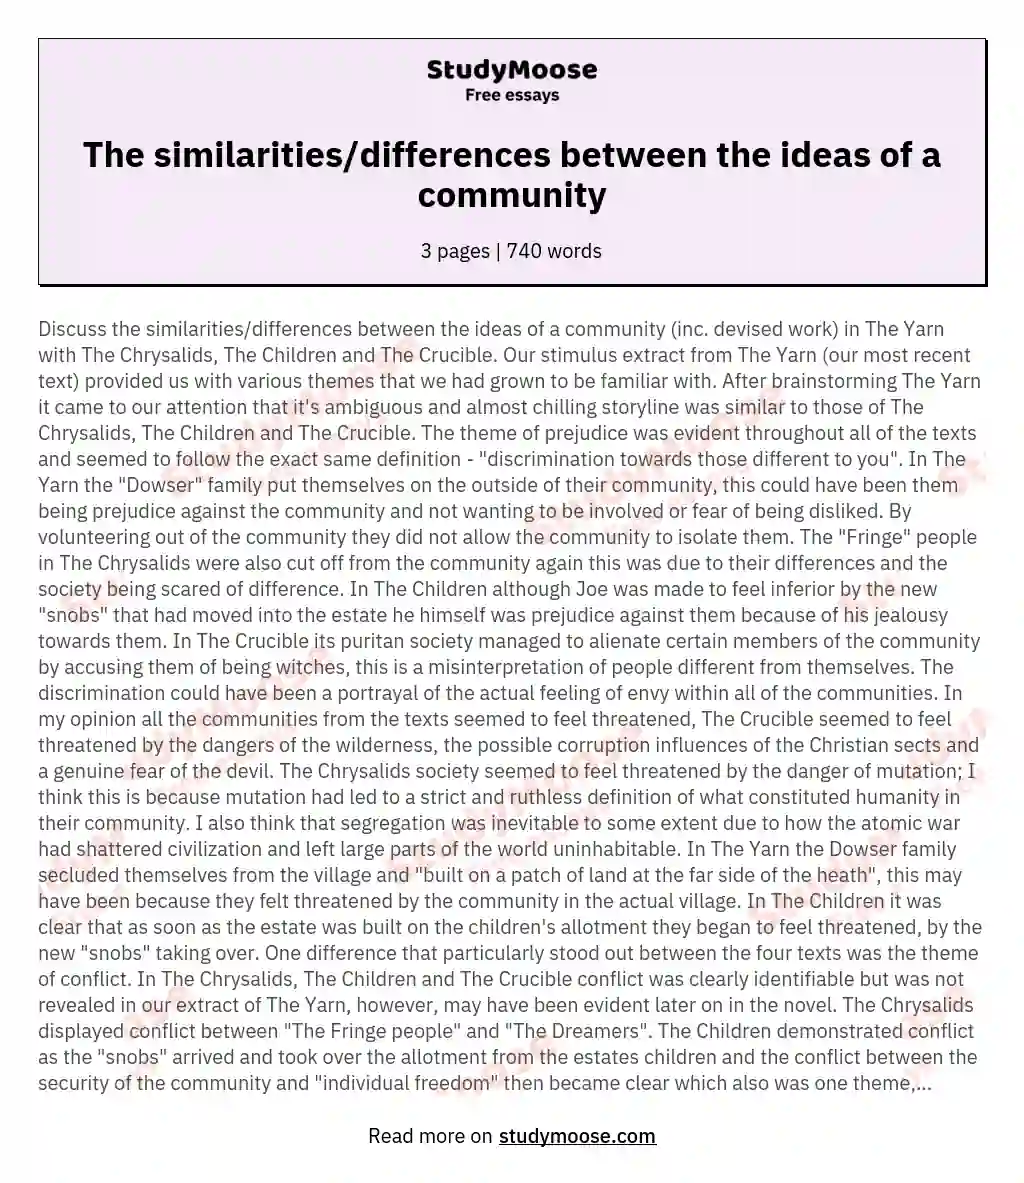 The similarities/differences between the ideas of a community essay